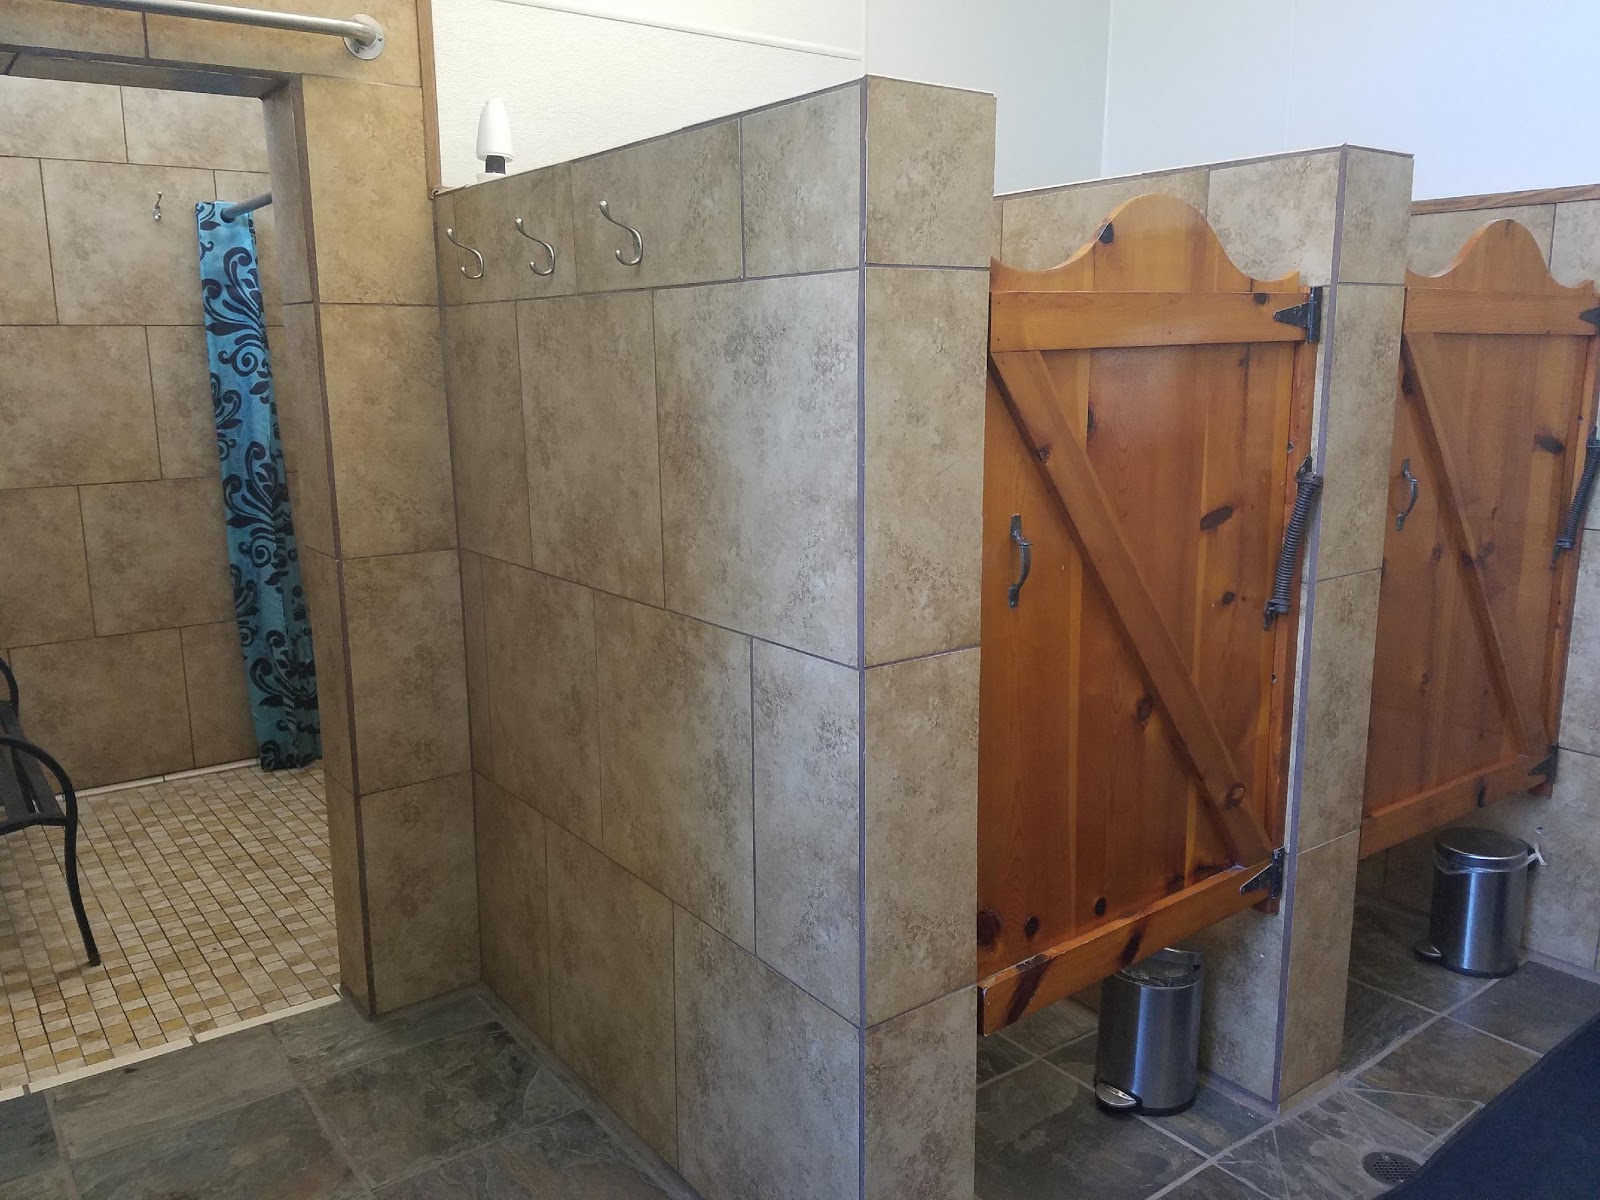 We clean and sanitize our restrooms and showers daily plus our showers are always hot! We also have a handicap accessible restroom and shower available.